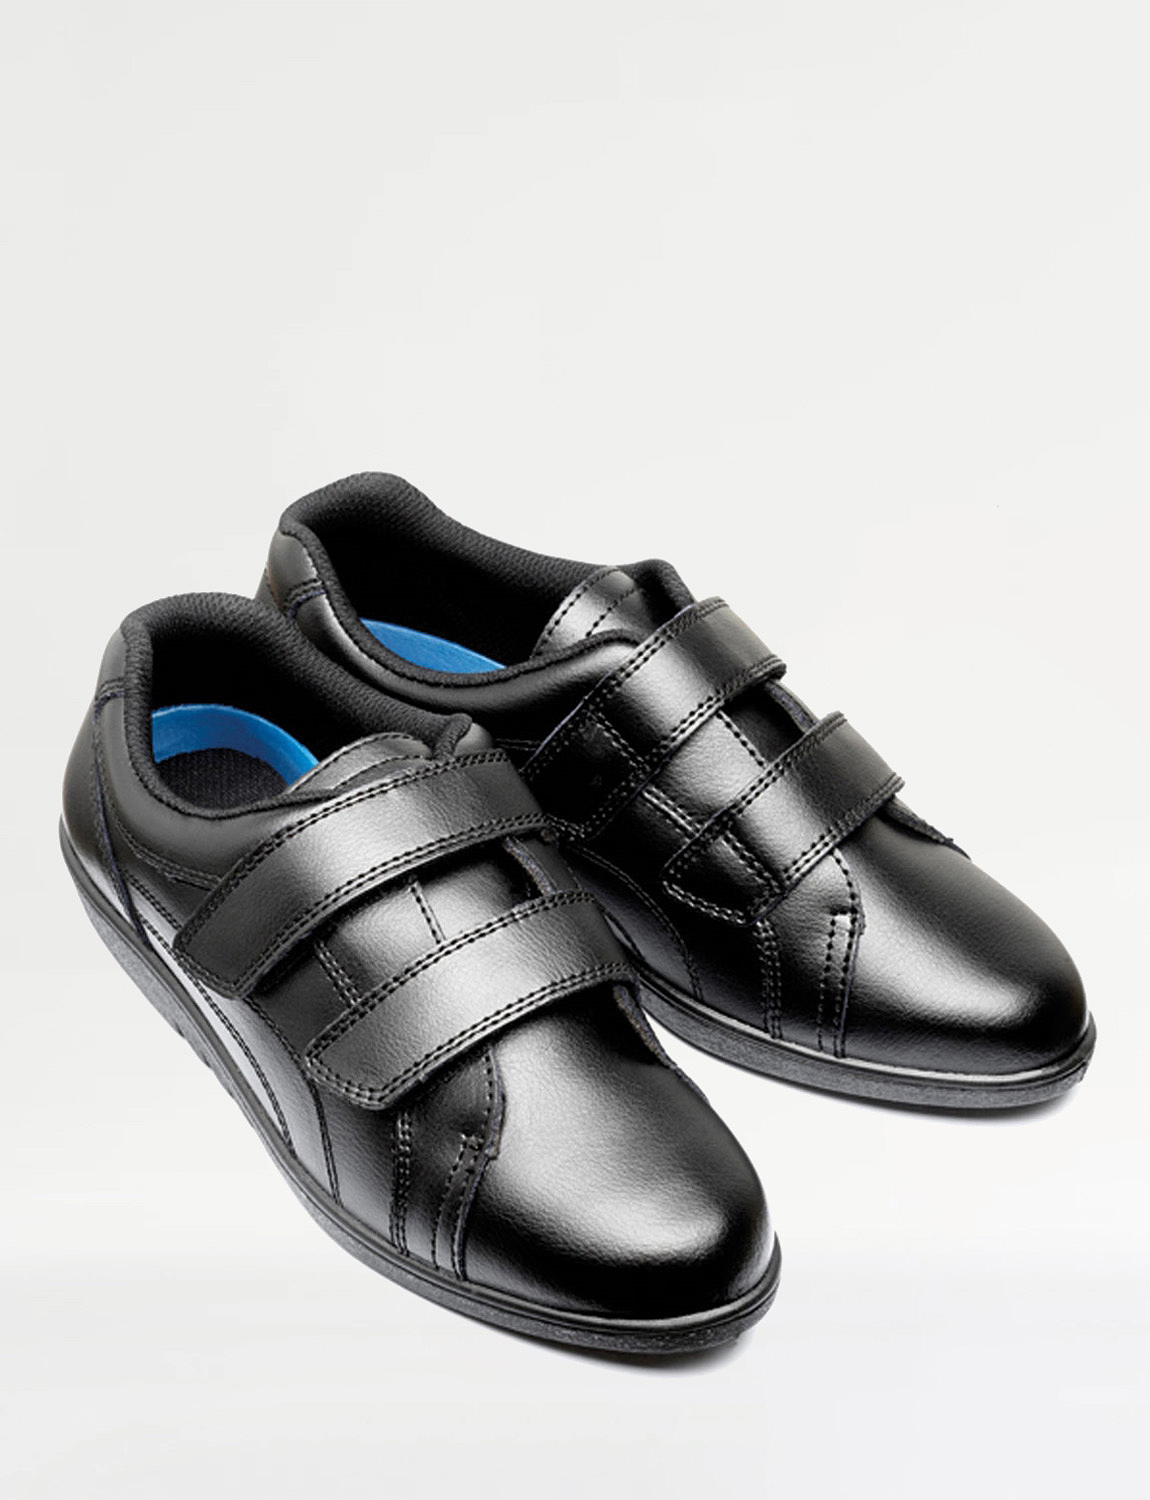 Freestep Washable Leather Touch And Close Leisure Shoes | Chums